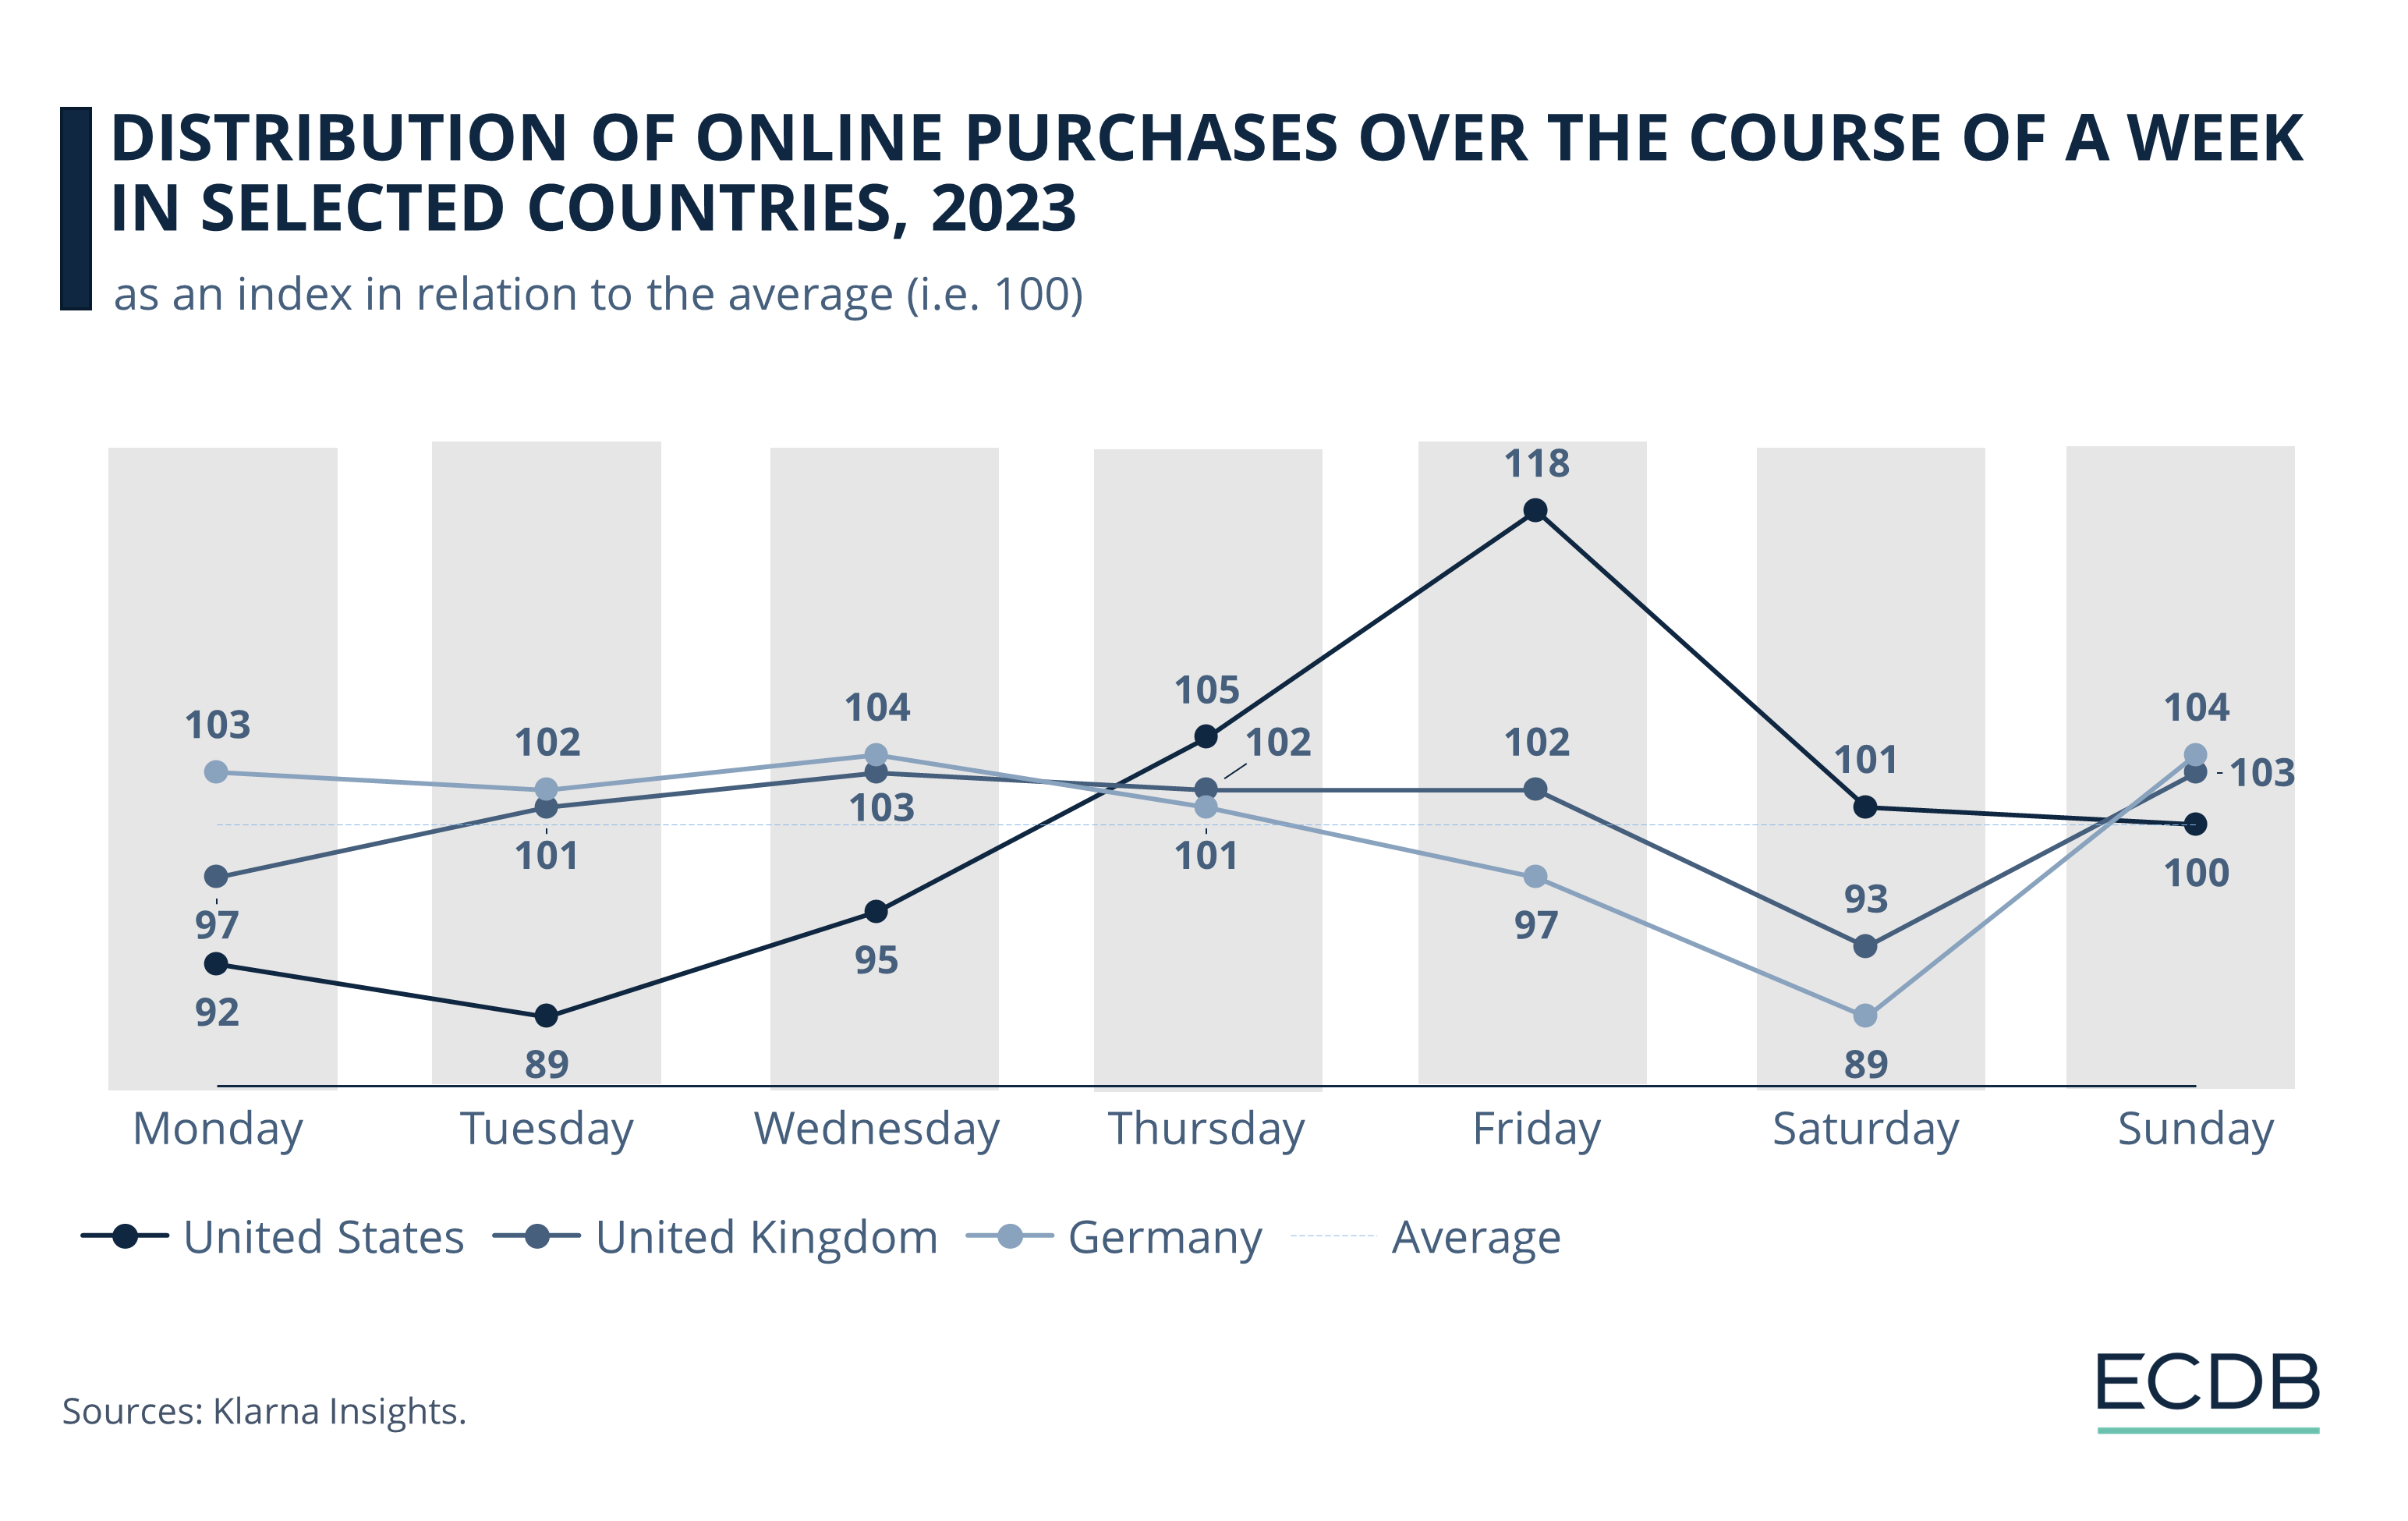 Distribution of Online Purchases Over the Course of a Week in Selected Countries, 2023